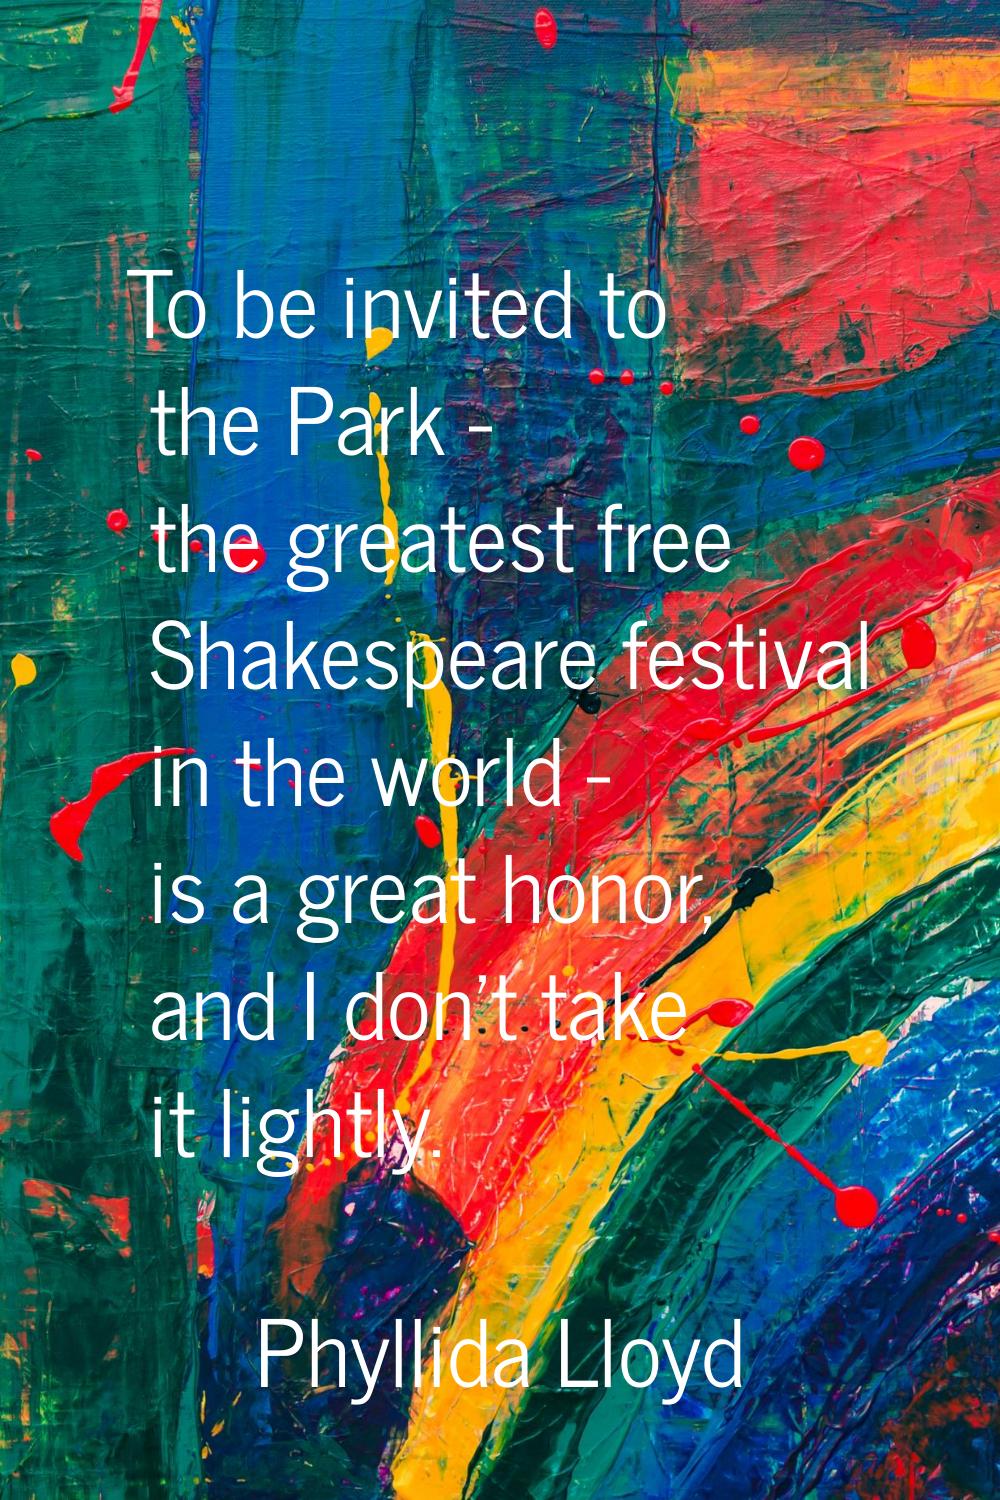 To be invited to the Park - the greatest free Shakespeare festival in the world - is a great honor,